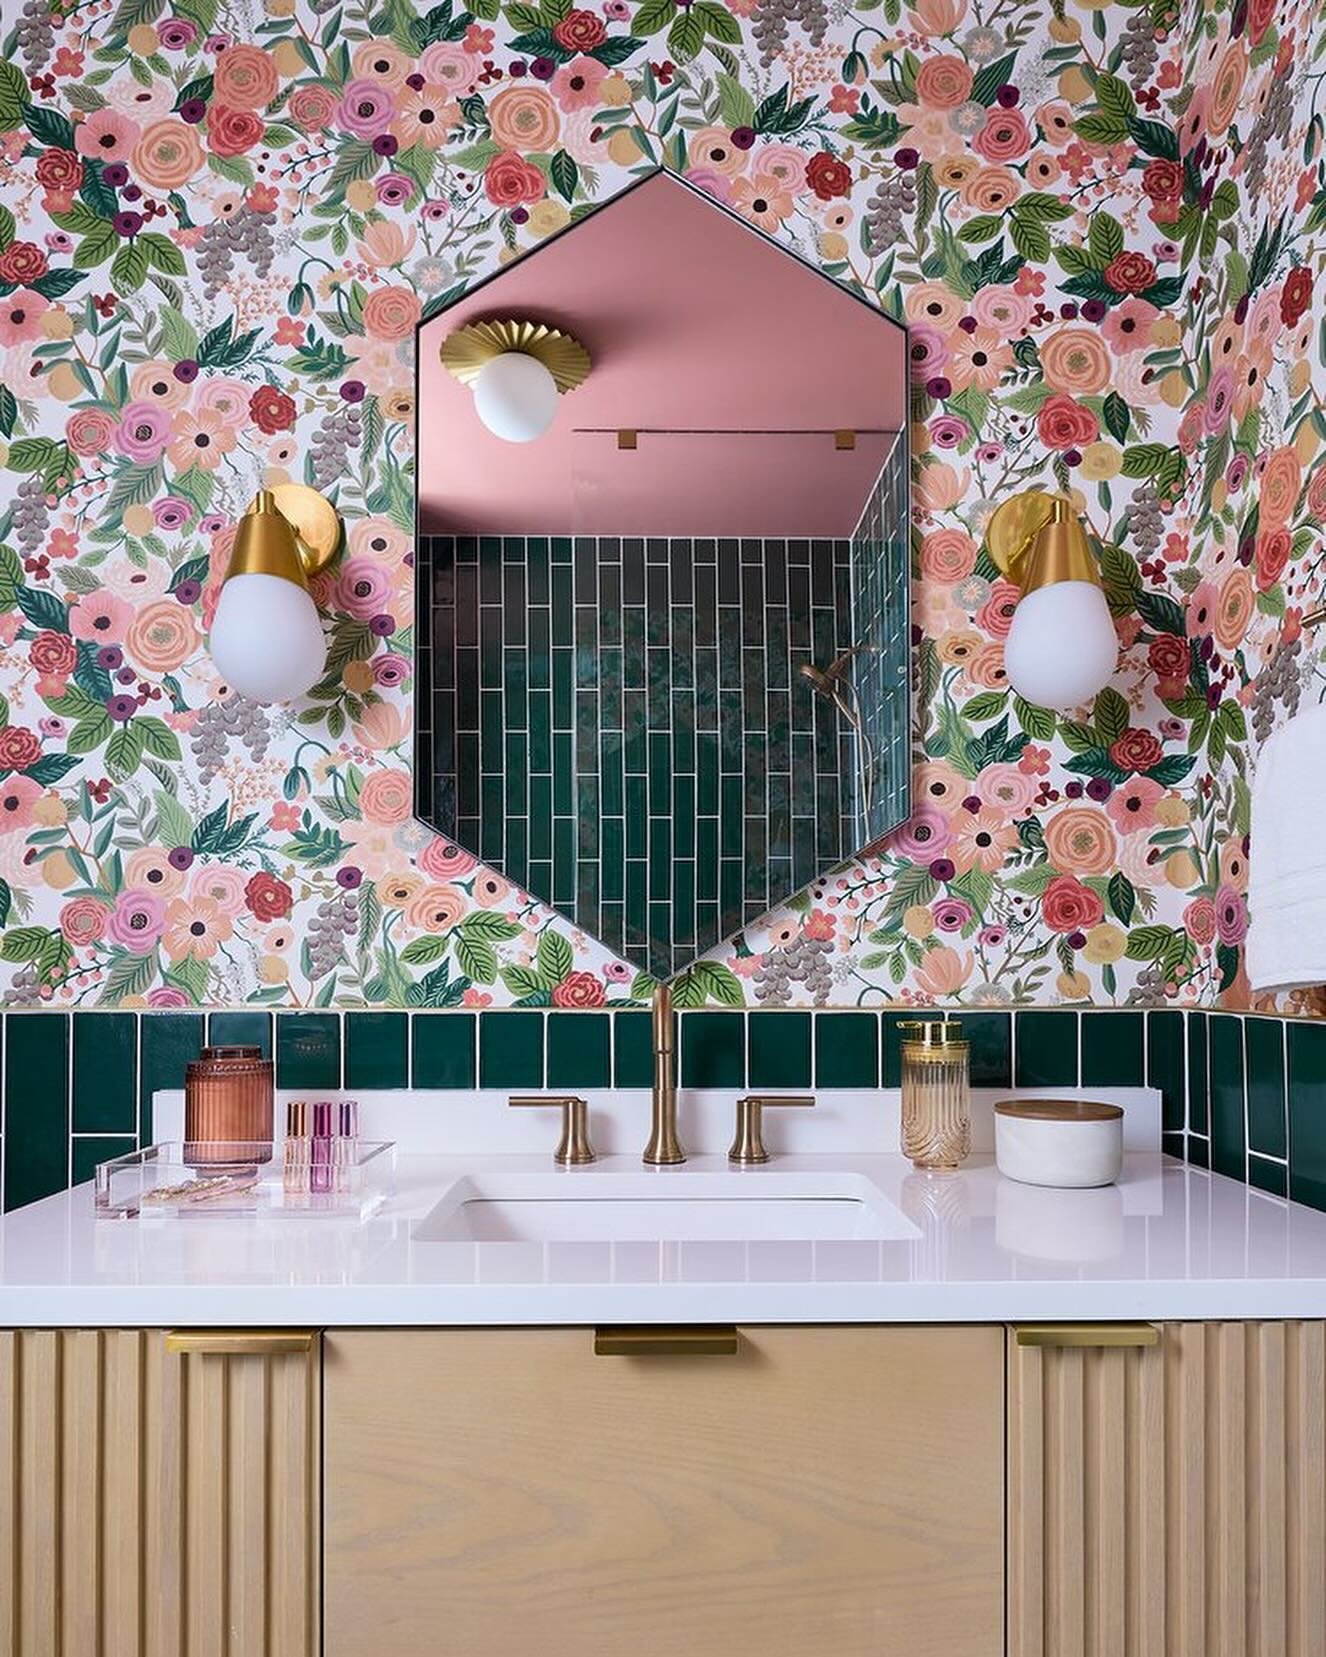 A bright, beautiful upgrade for this bathroom 🌸 
#wallpaperwednesday

📸 @dustinforest